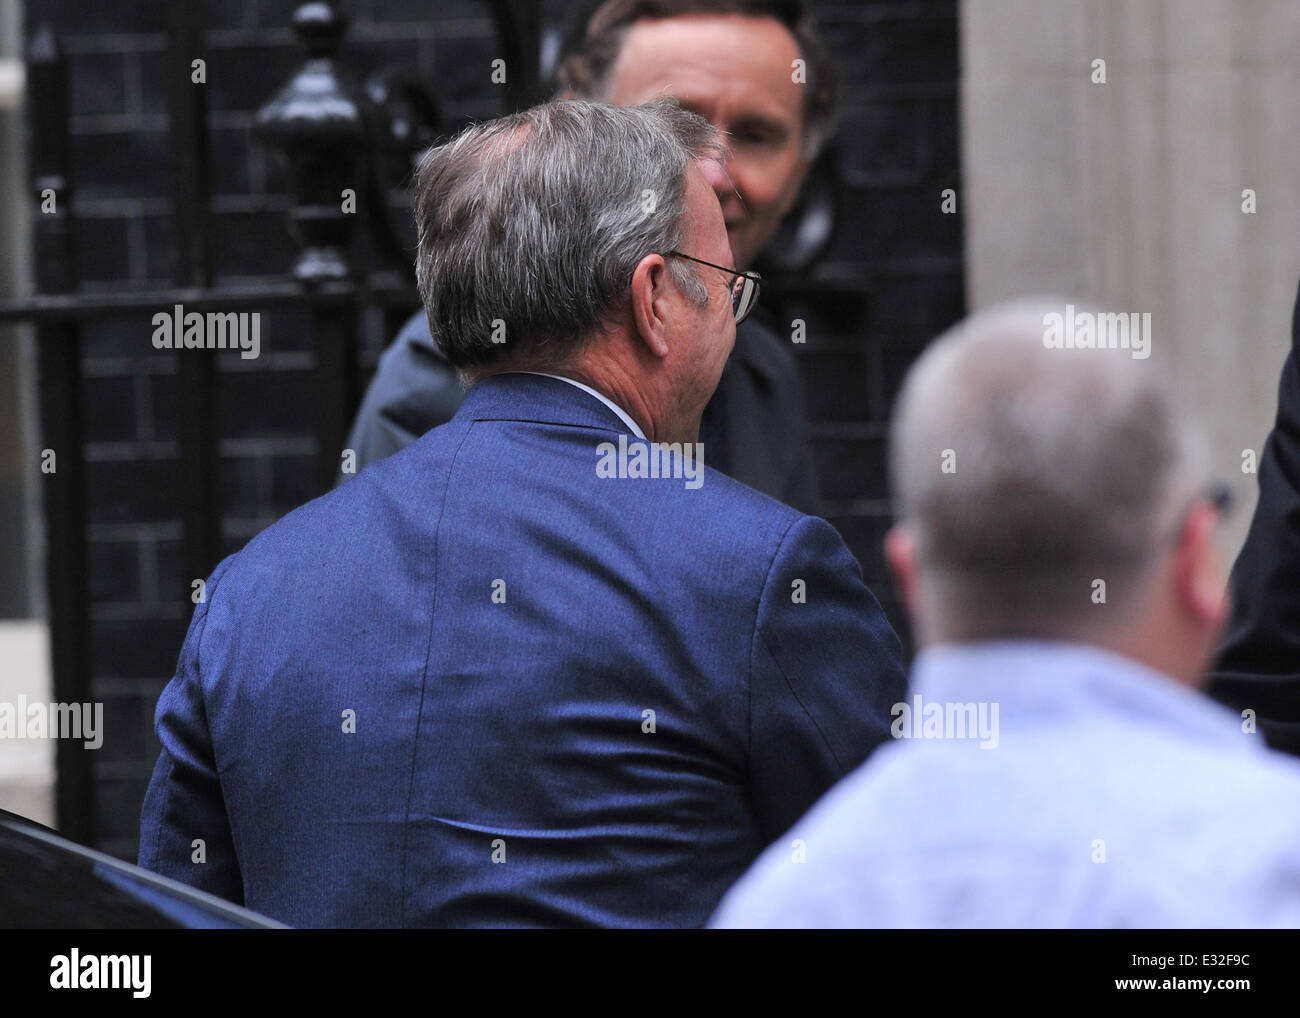 Business leaders arrive at 10 Downing Street for Business Advisory Group meeting with Prime Minister David Cameron. London, England - 20.05.13  Featuring: Eric Schmidt,Executive Chairman,Google (C) Where: London, United Kingdom When: 20 May 2013 Stock Photo